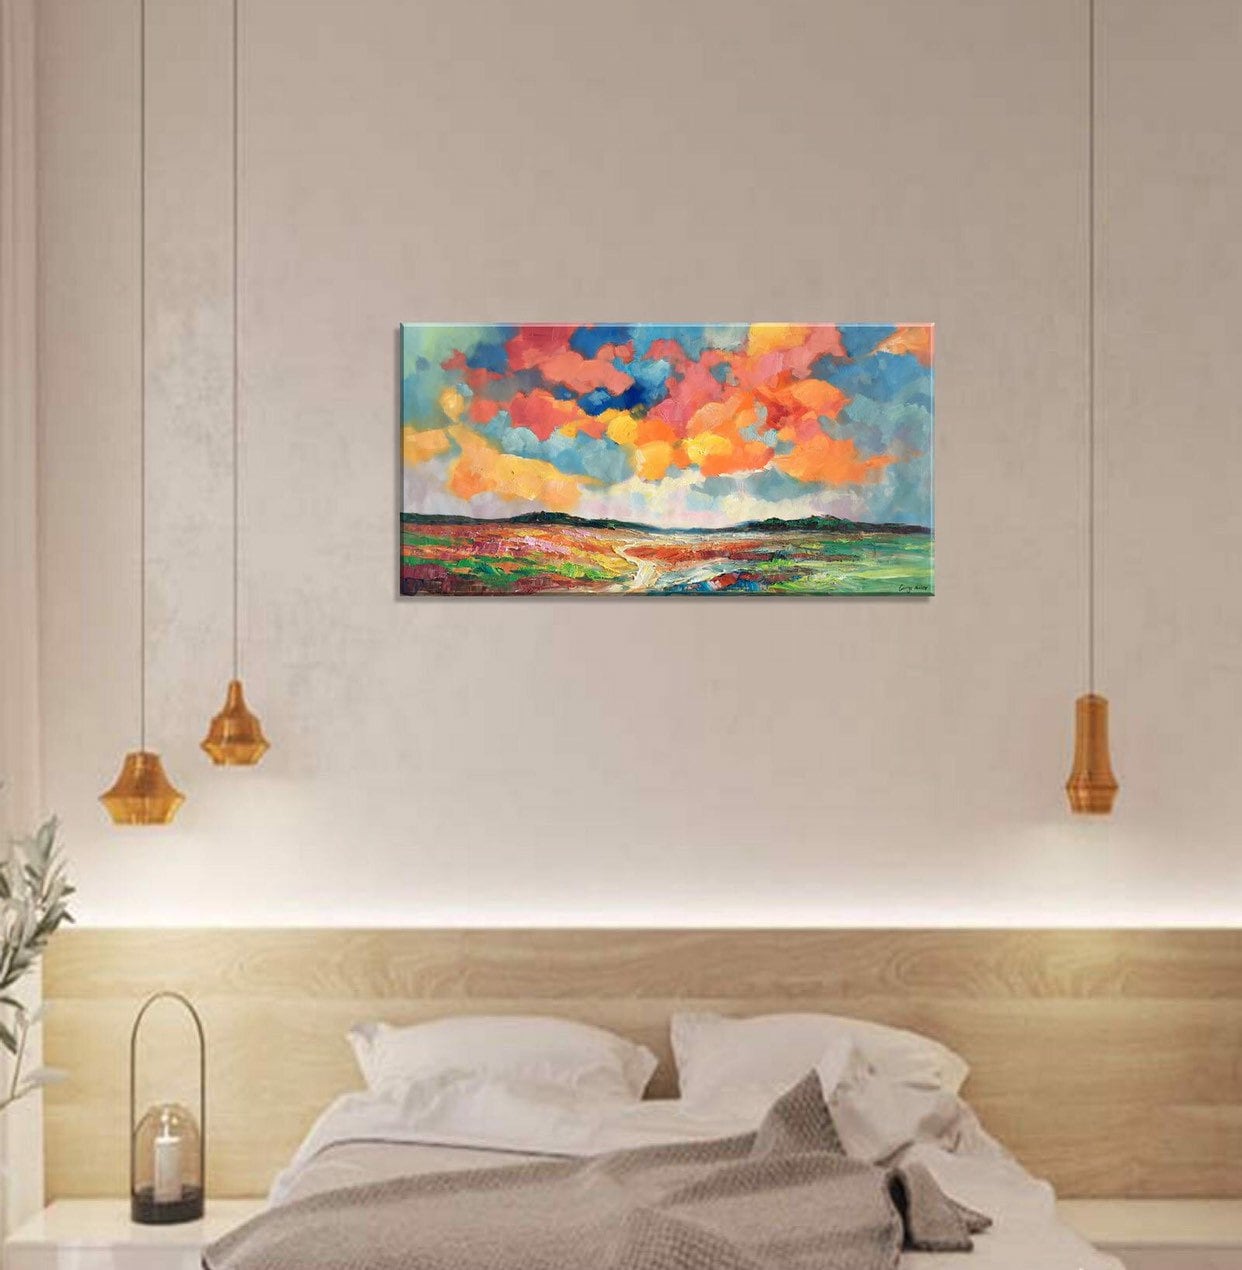 Large Oil Painting, Painting Abstract, Abstract Wall Art, Contemporary Painting, Canvas Art, Original Artwork, Kitchen Wall Decor, Abstract